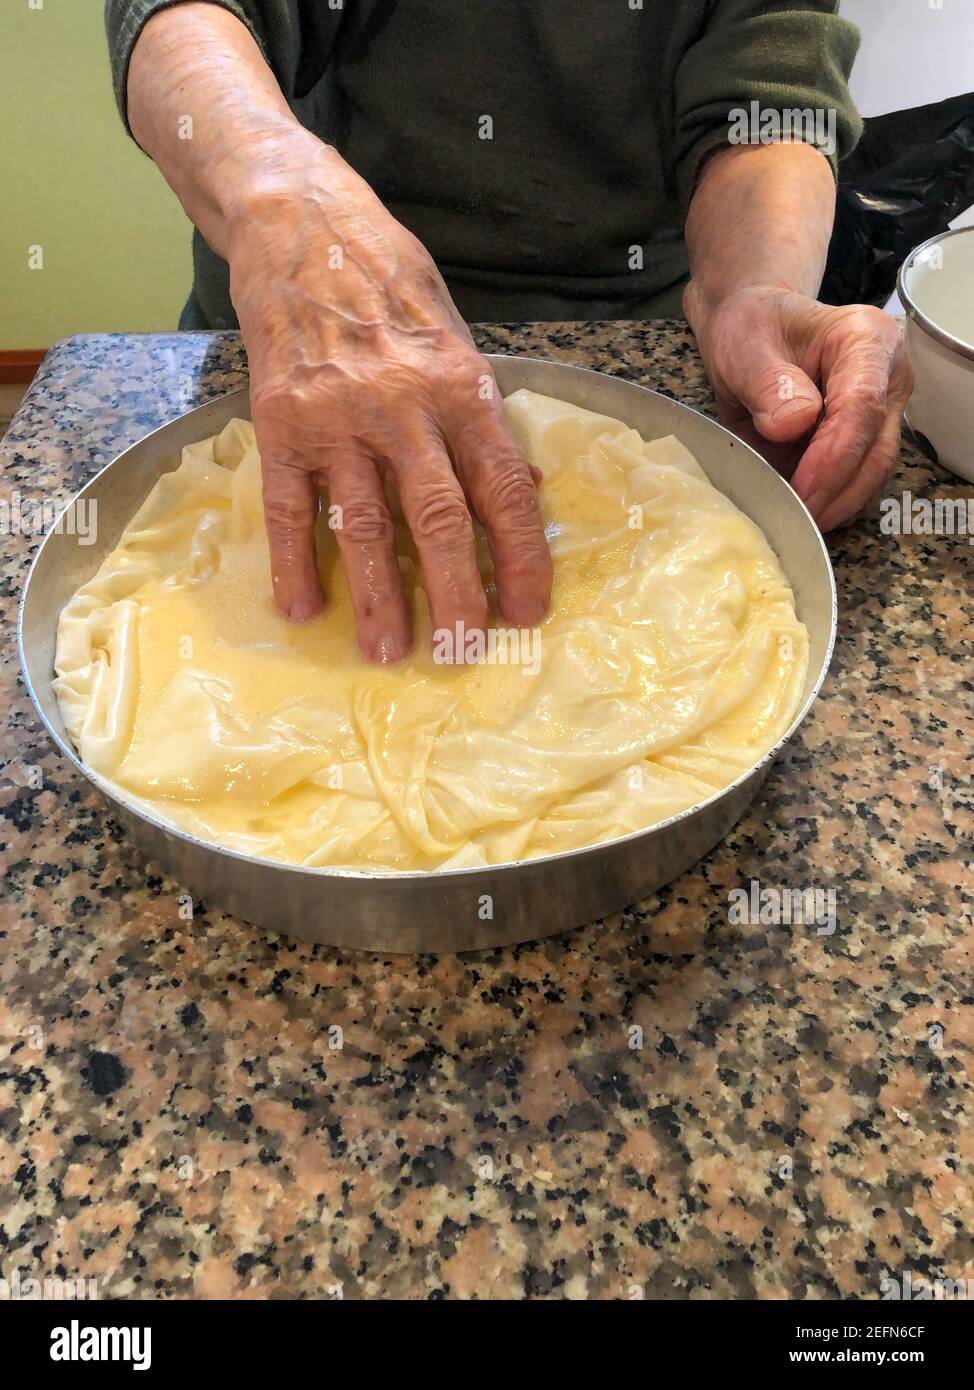 close up wrinkled hands making dough pastry in the kitchen Stock Photo